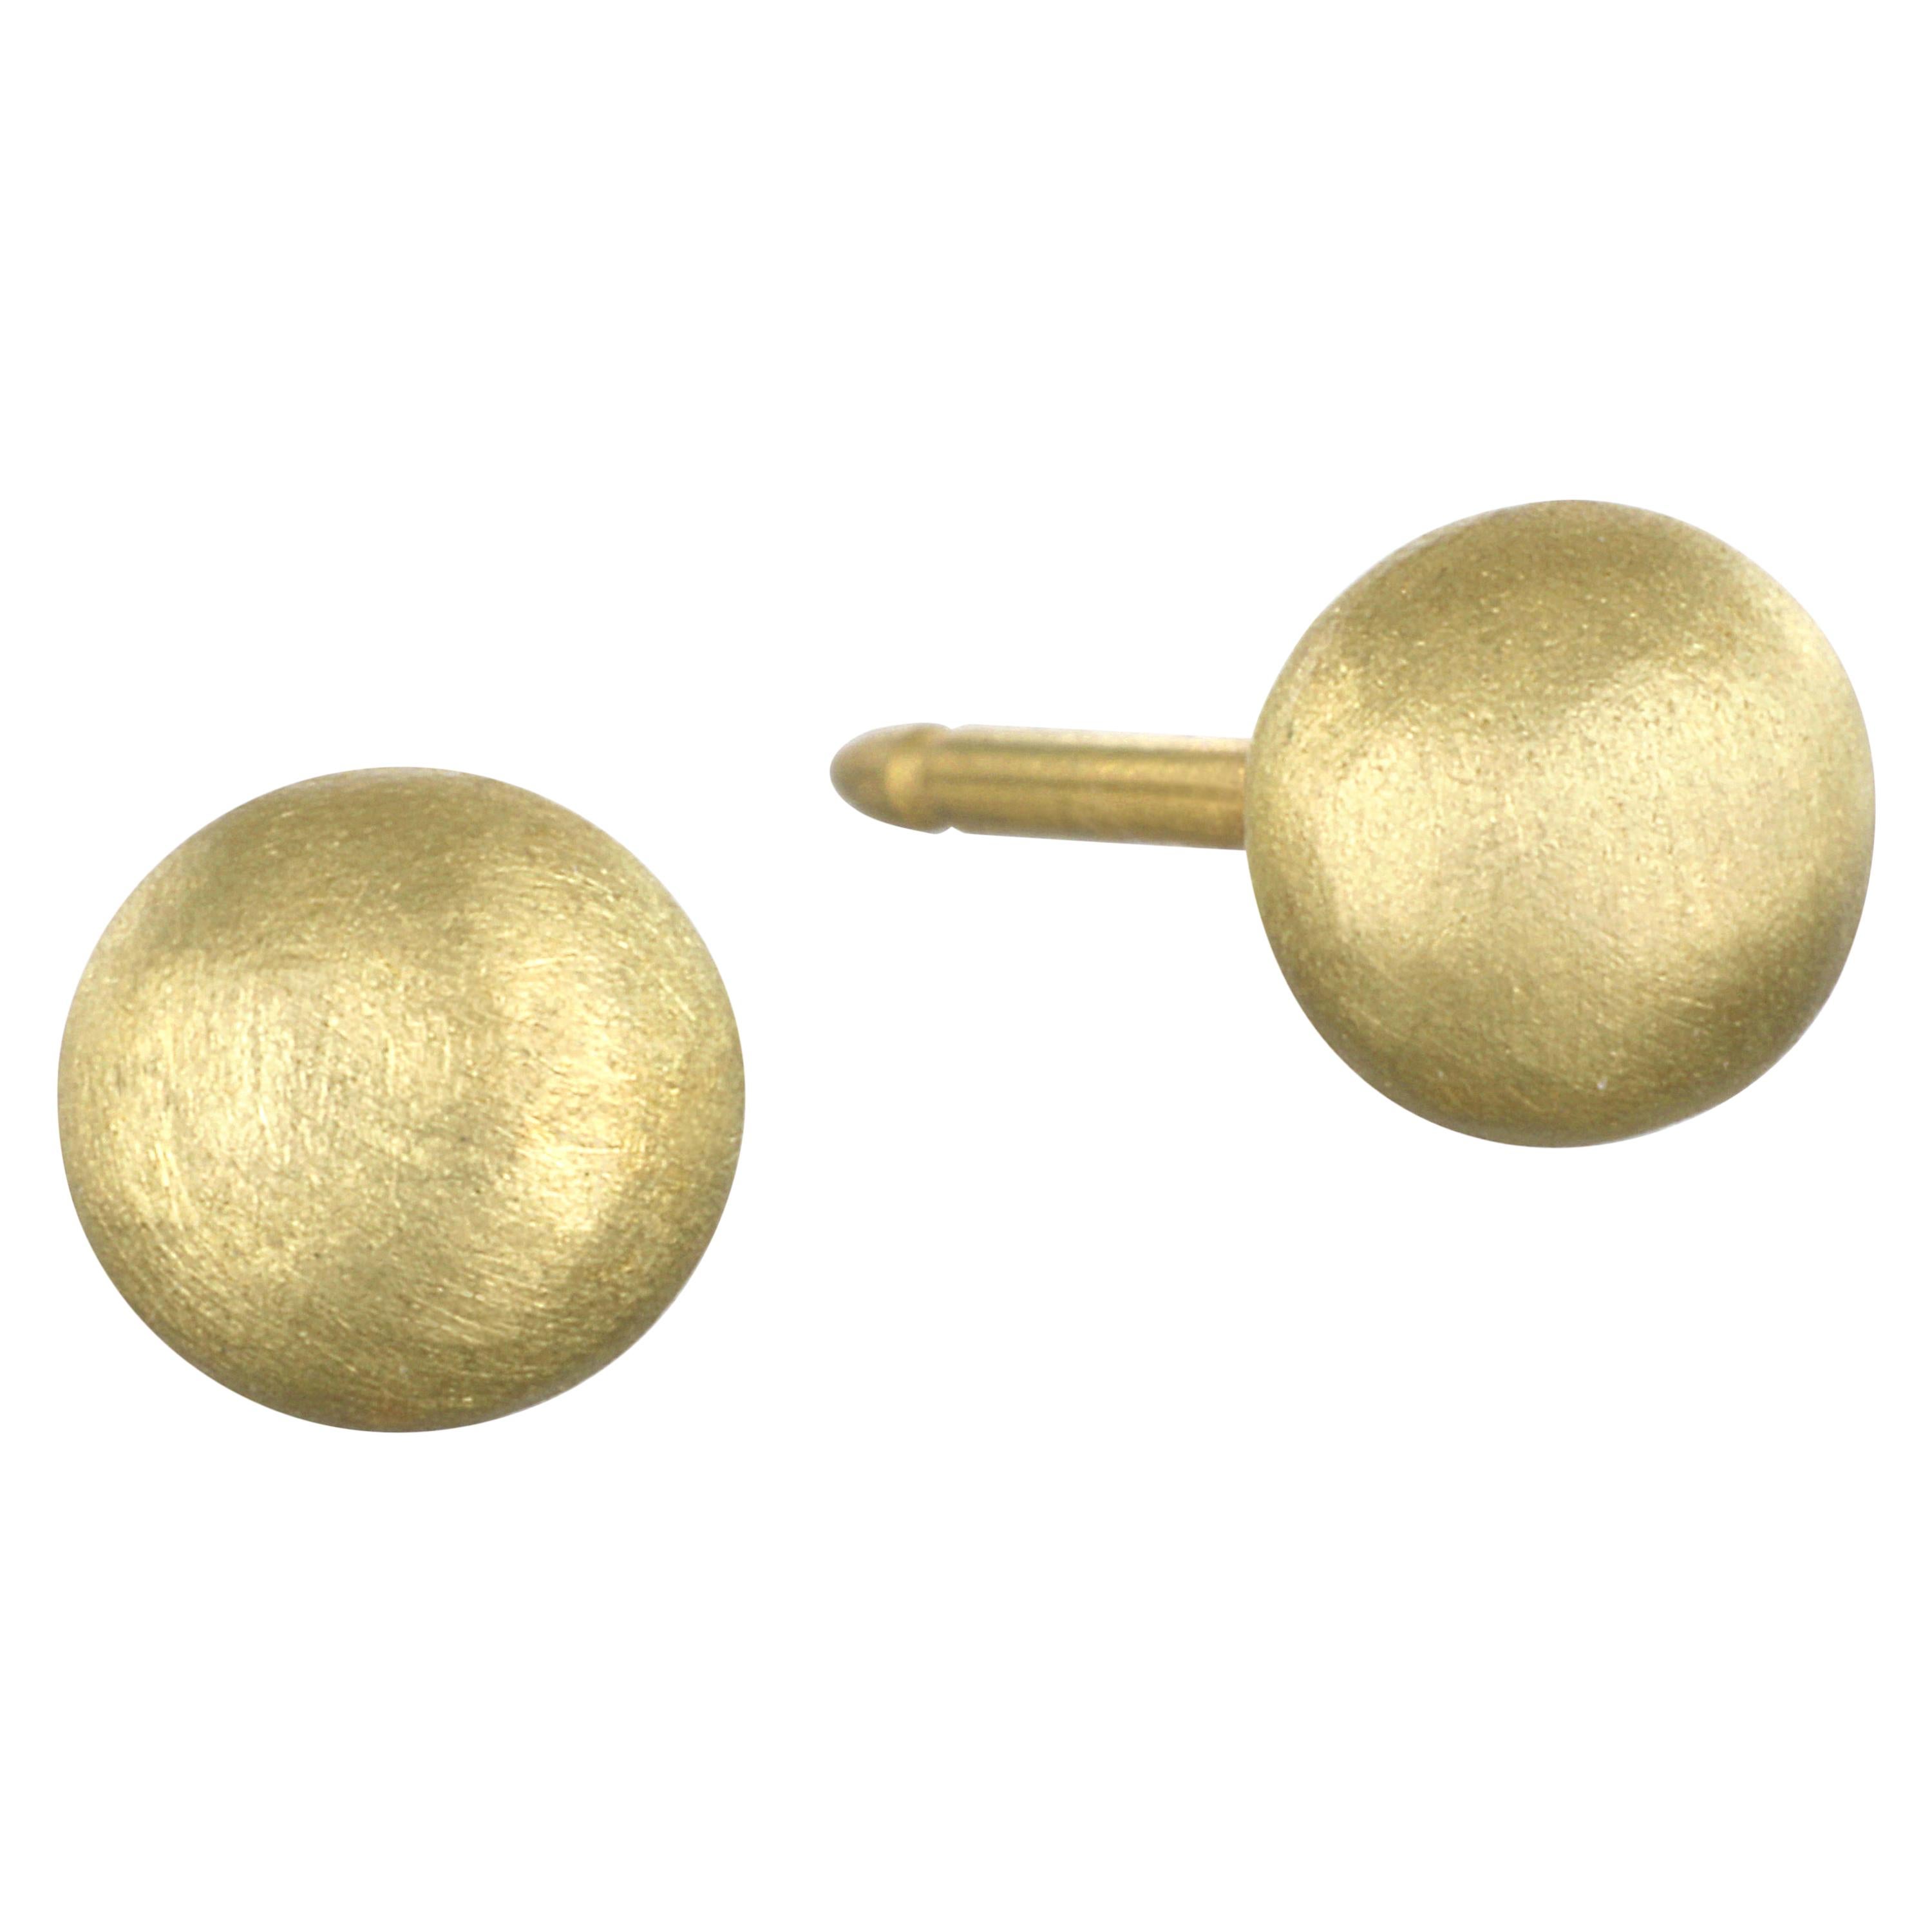 Handcrafted in 18 karat gold with a matte finish, Faye Kim’s mini button stud design is a simple, contemporary accessory for those looking for a go-to, minimalistic look. 

This is the smallest variation of button studs. 5mm diameter.

Made in the